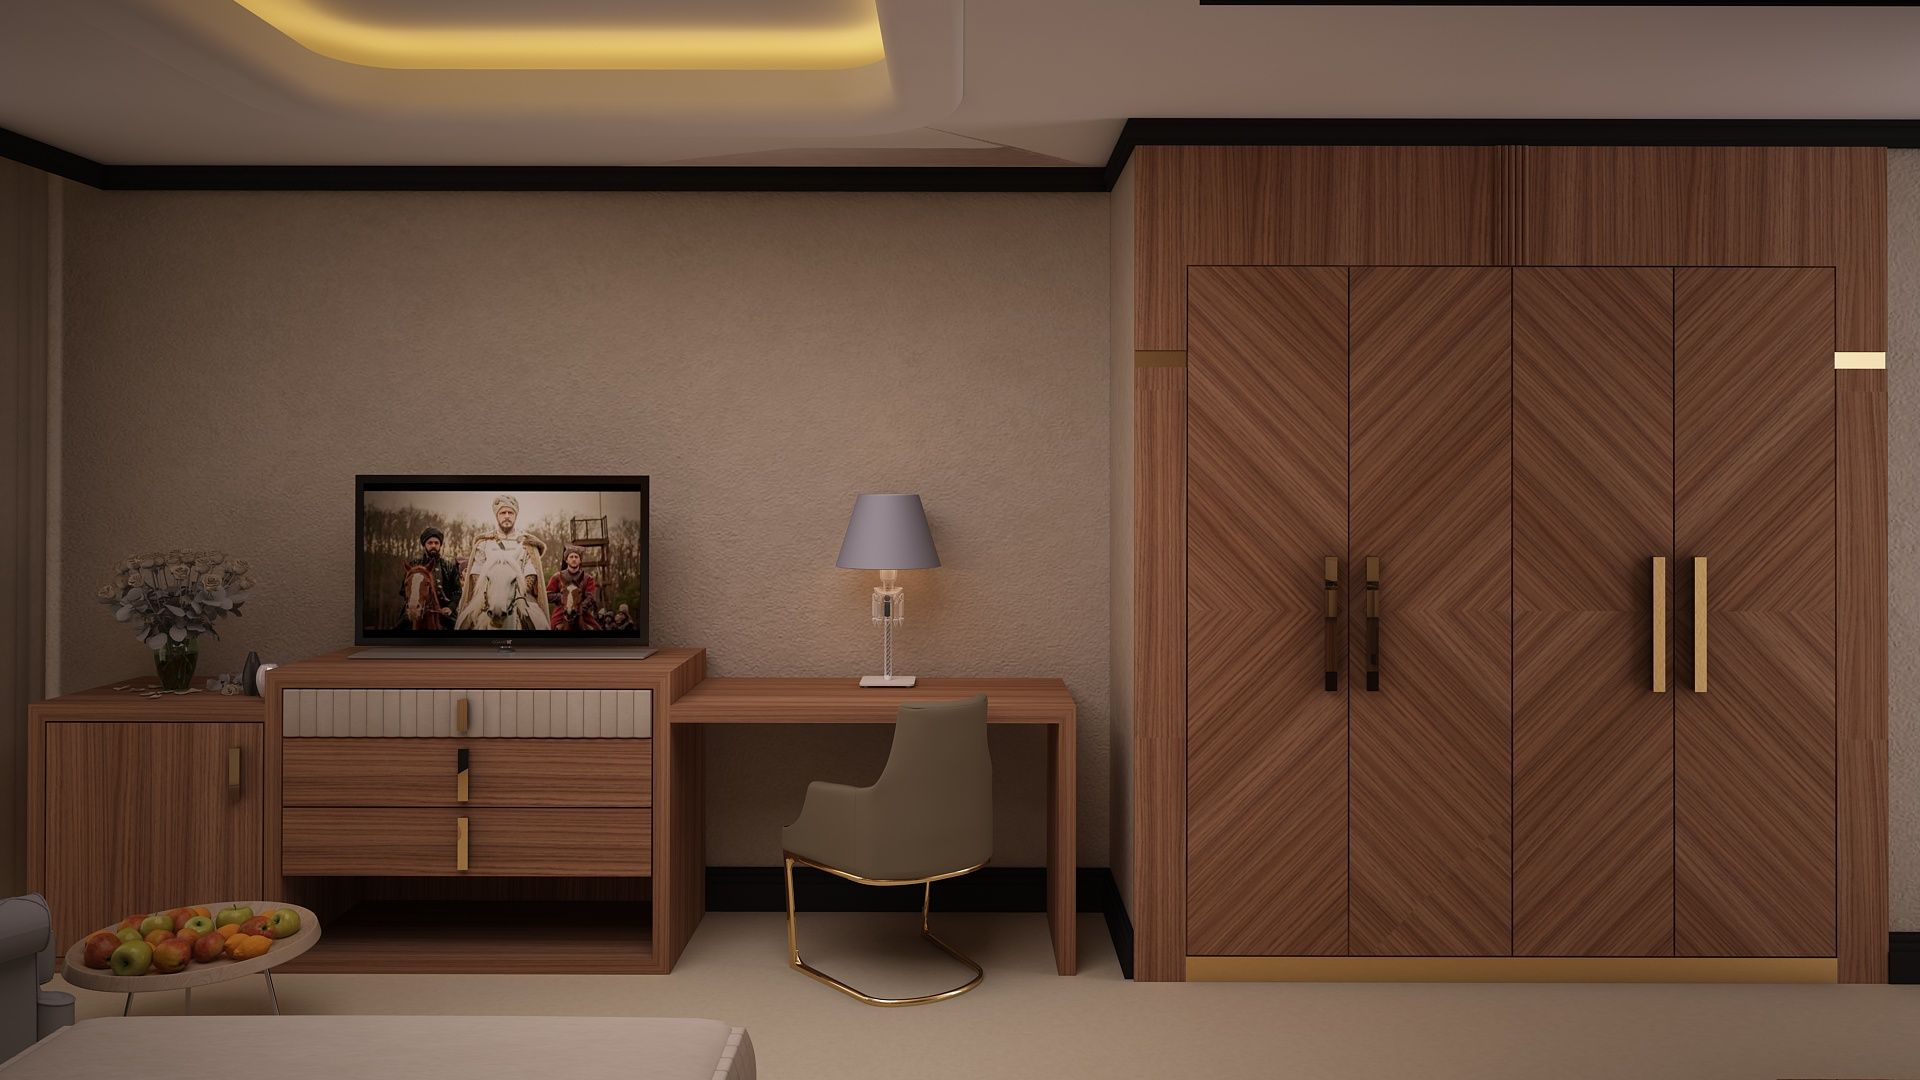 MOZAMBIQUE HOTEL PROJECT, VOLKAN TURHAN INTERIORS ARCHITECT VOLKAN TURHAN INTERIORS ARCHITECT Modern style bedroom